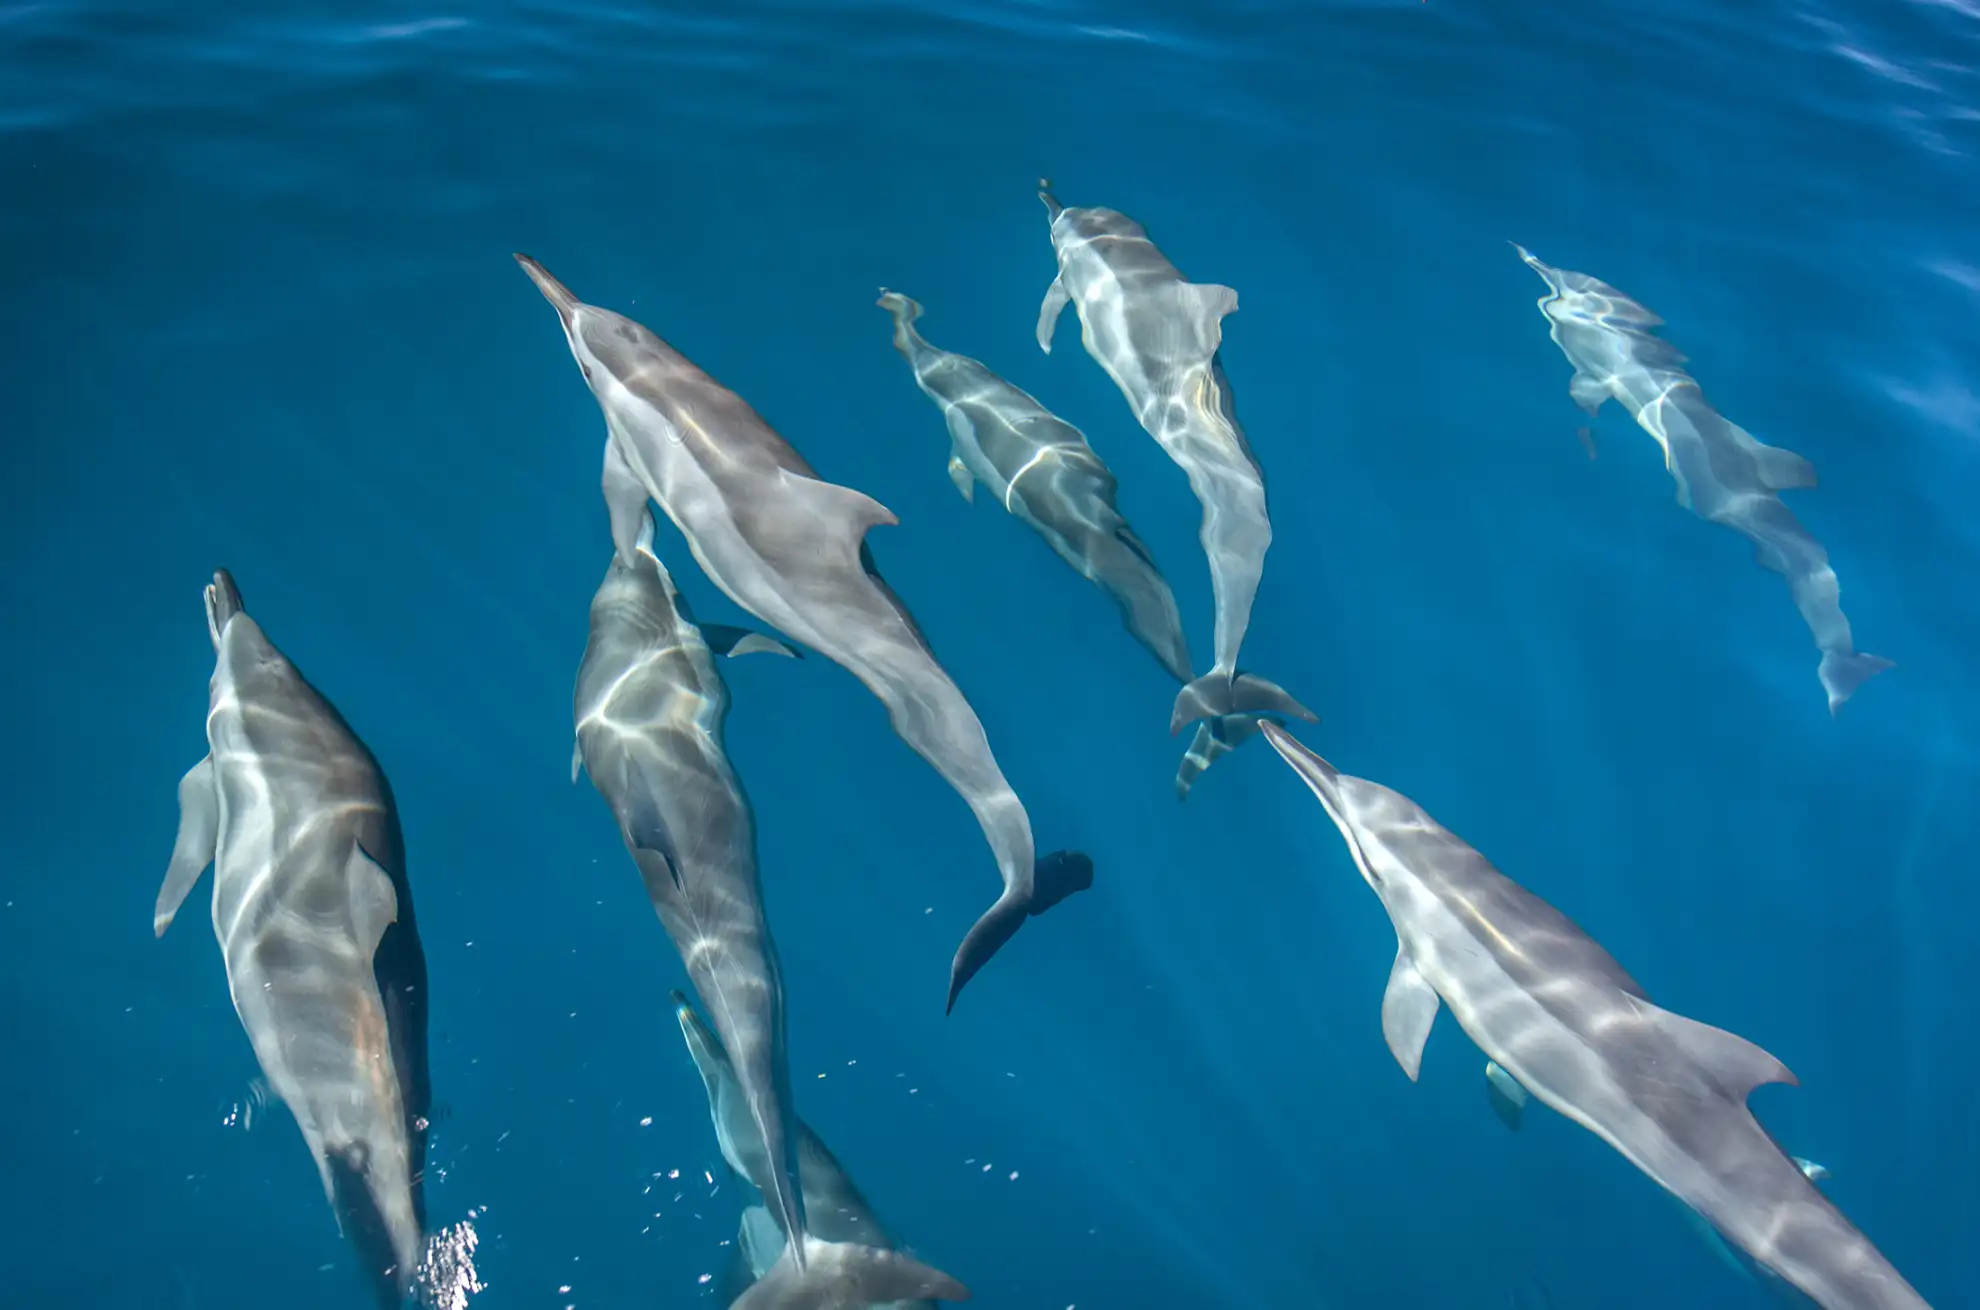 A school of dolphins were very curious that day.